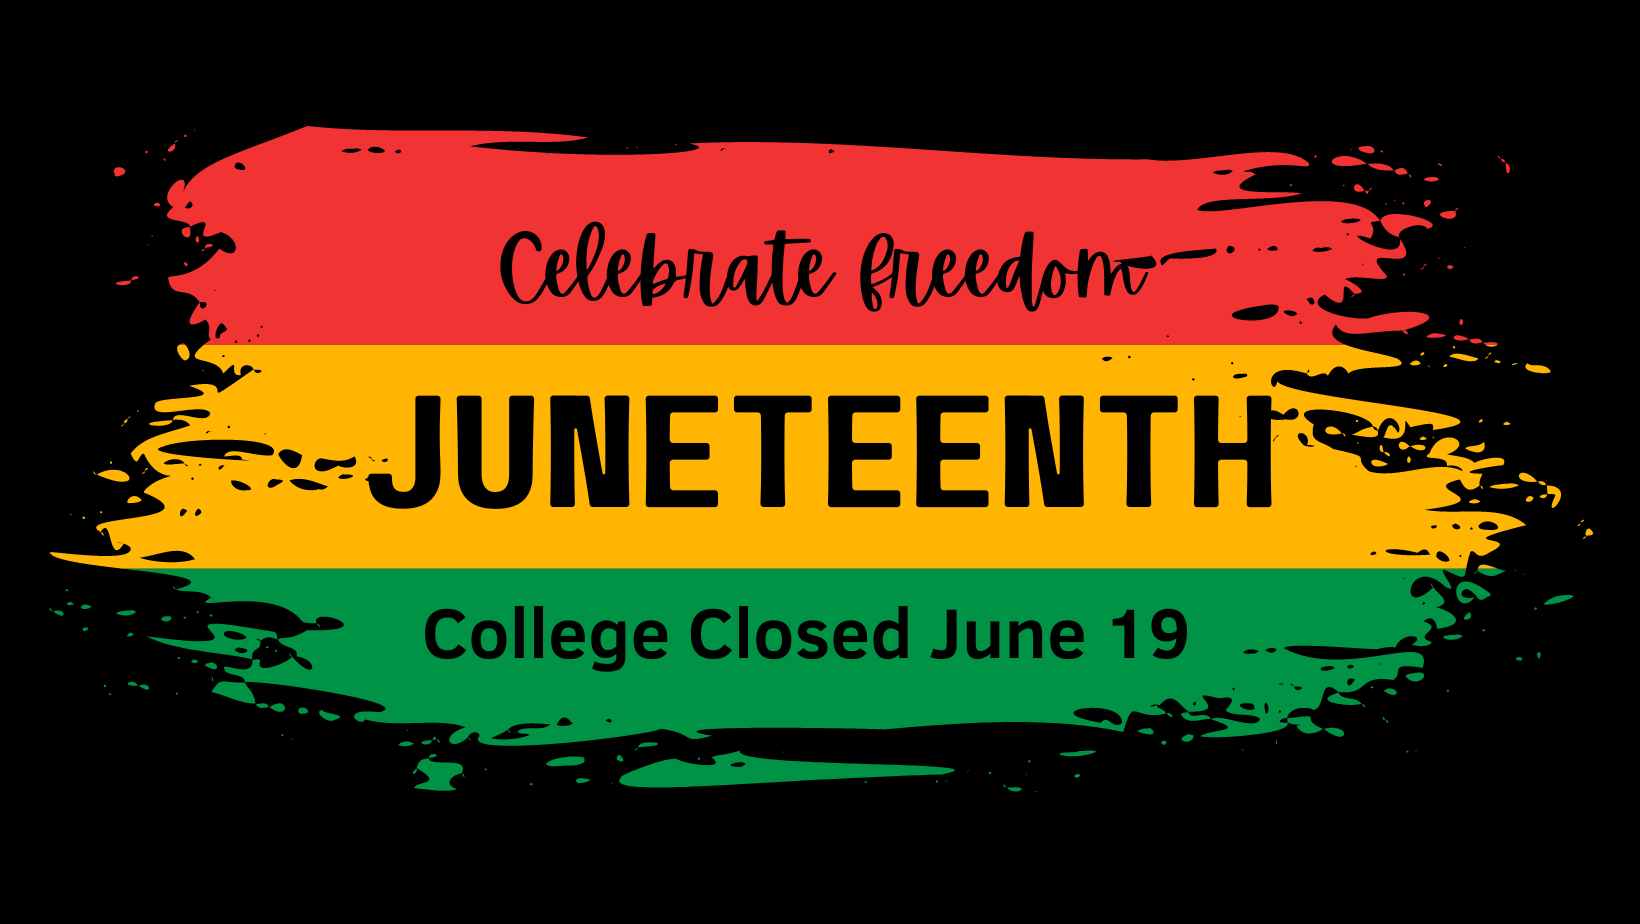 Red, Yellow and Green Graphic on Black Background says Celebrate Freedom, Juneteenth, College Closed June 19